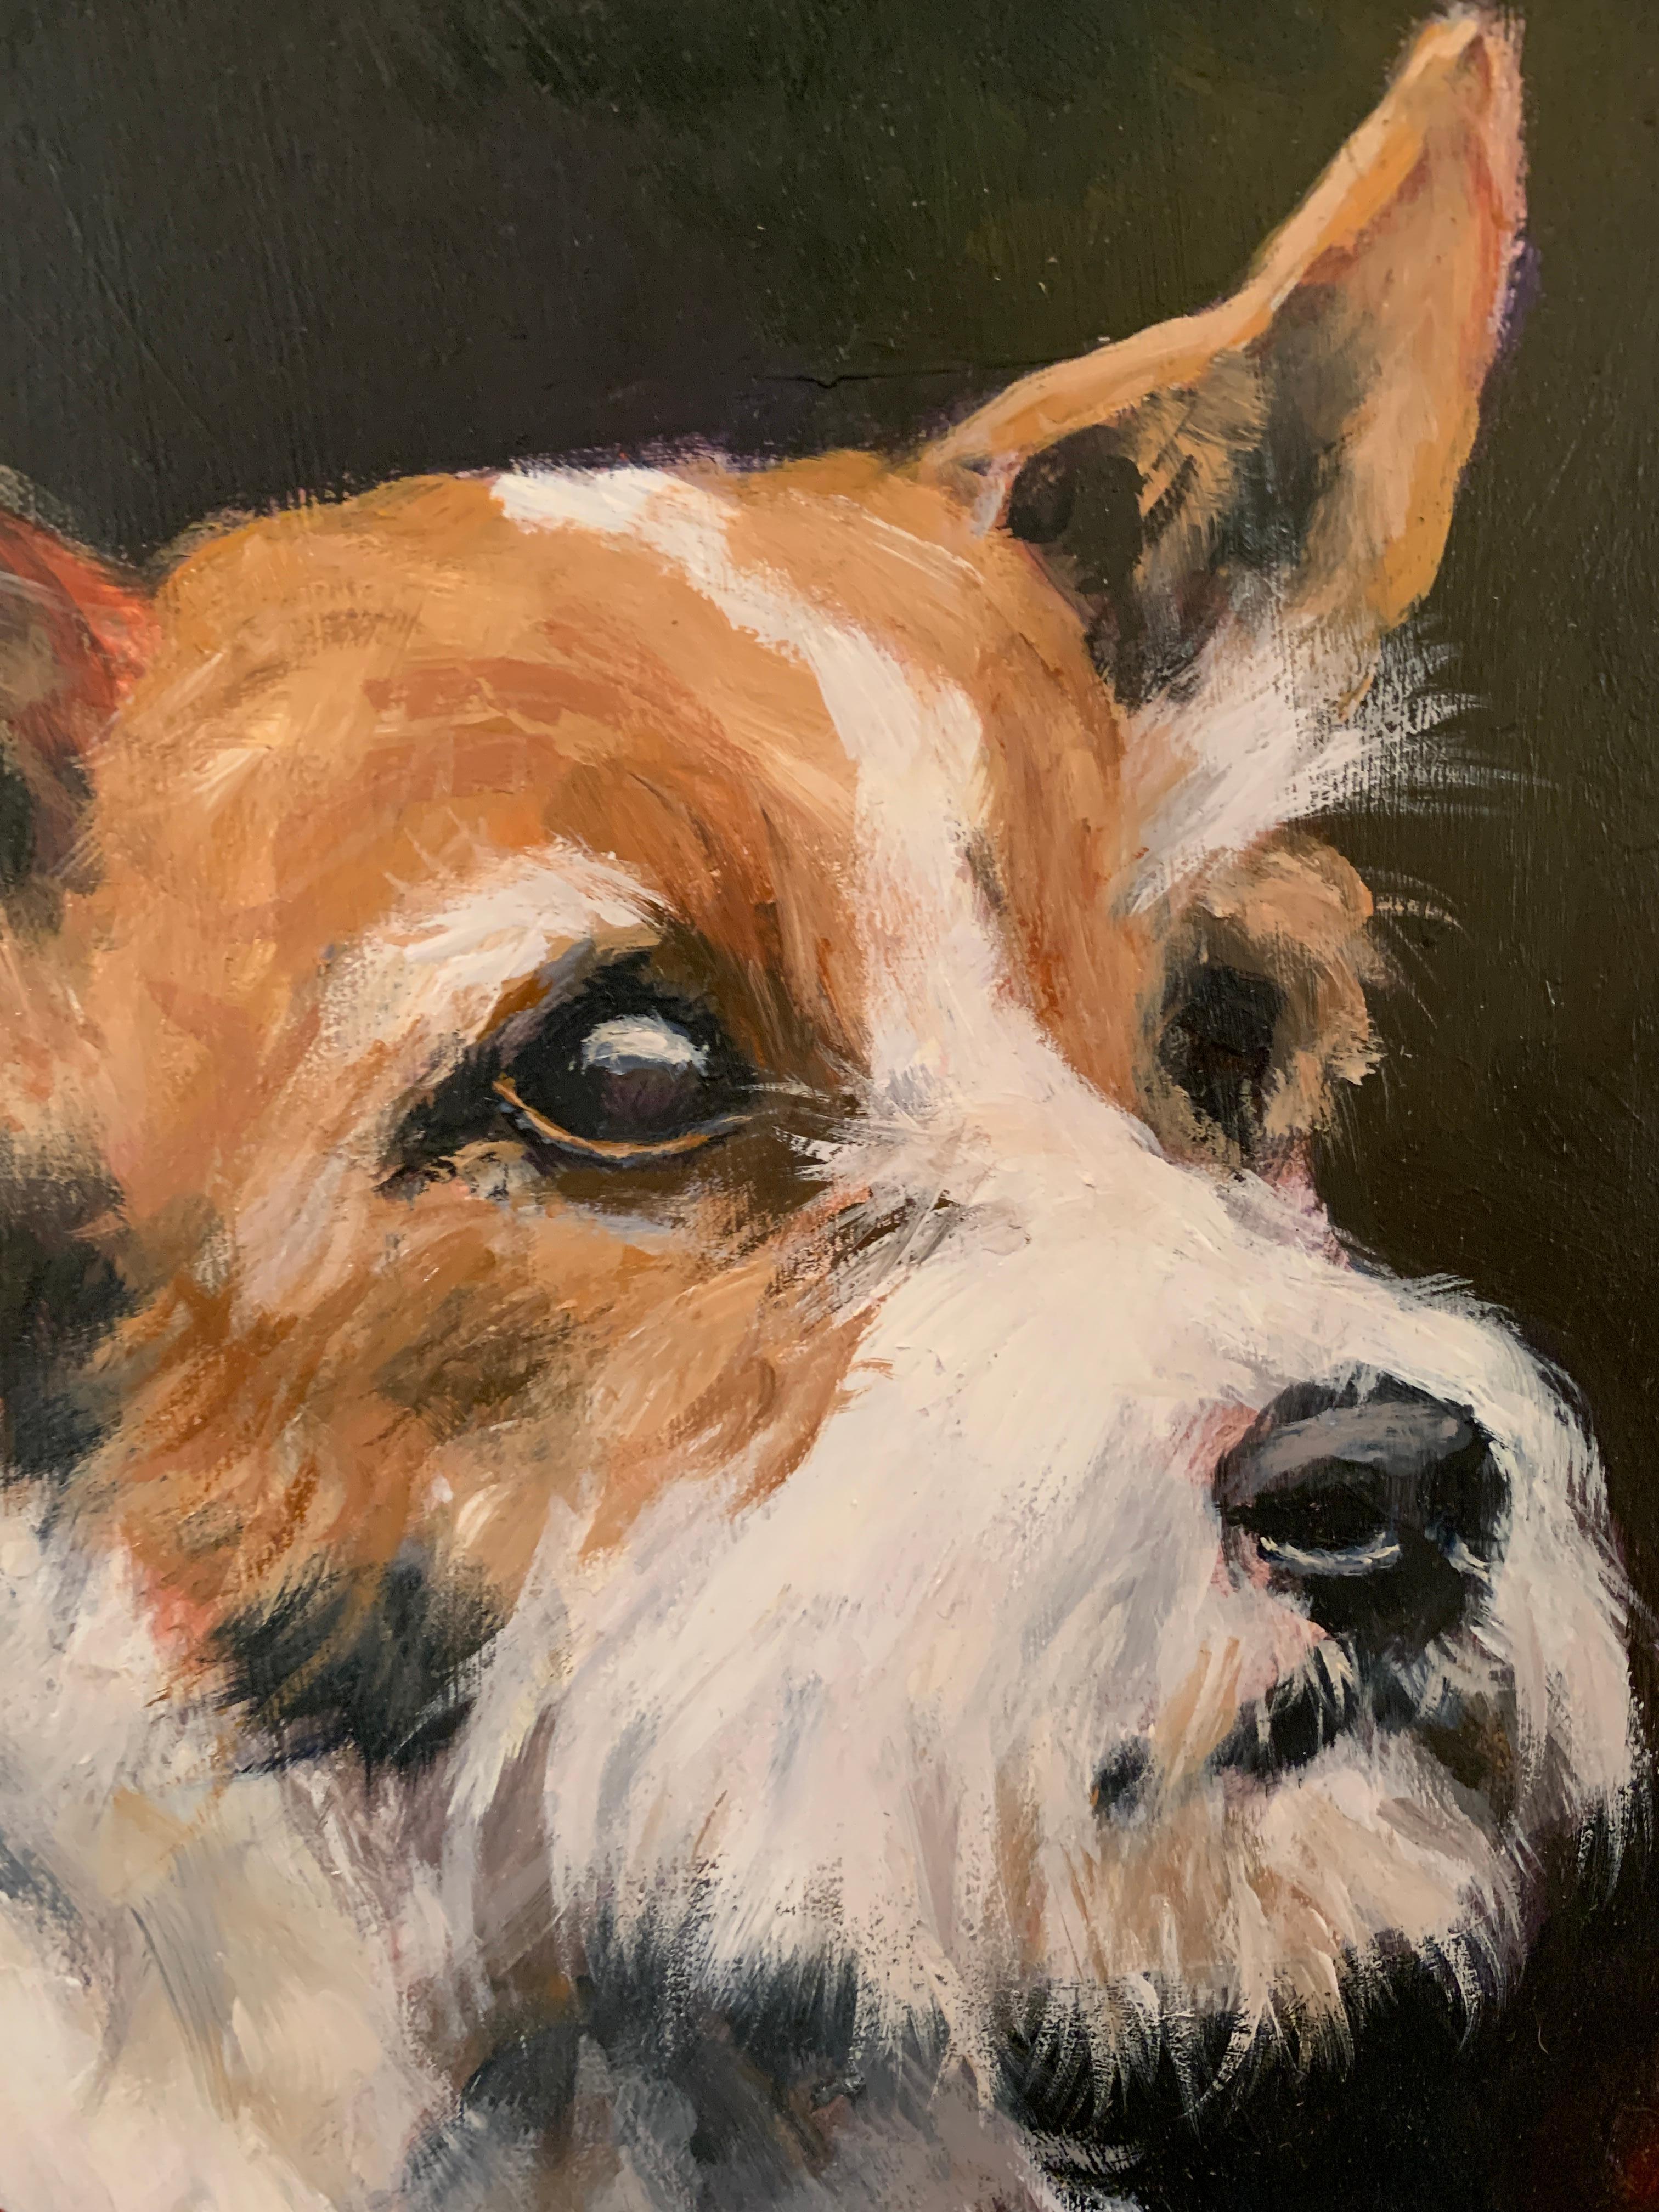 Oil painting of an English wire haired terrier dog or puppy - Painting by Derek Powell-Jones